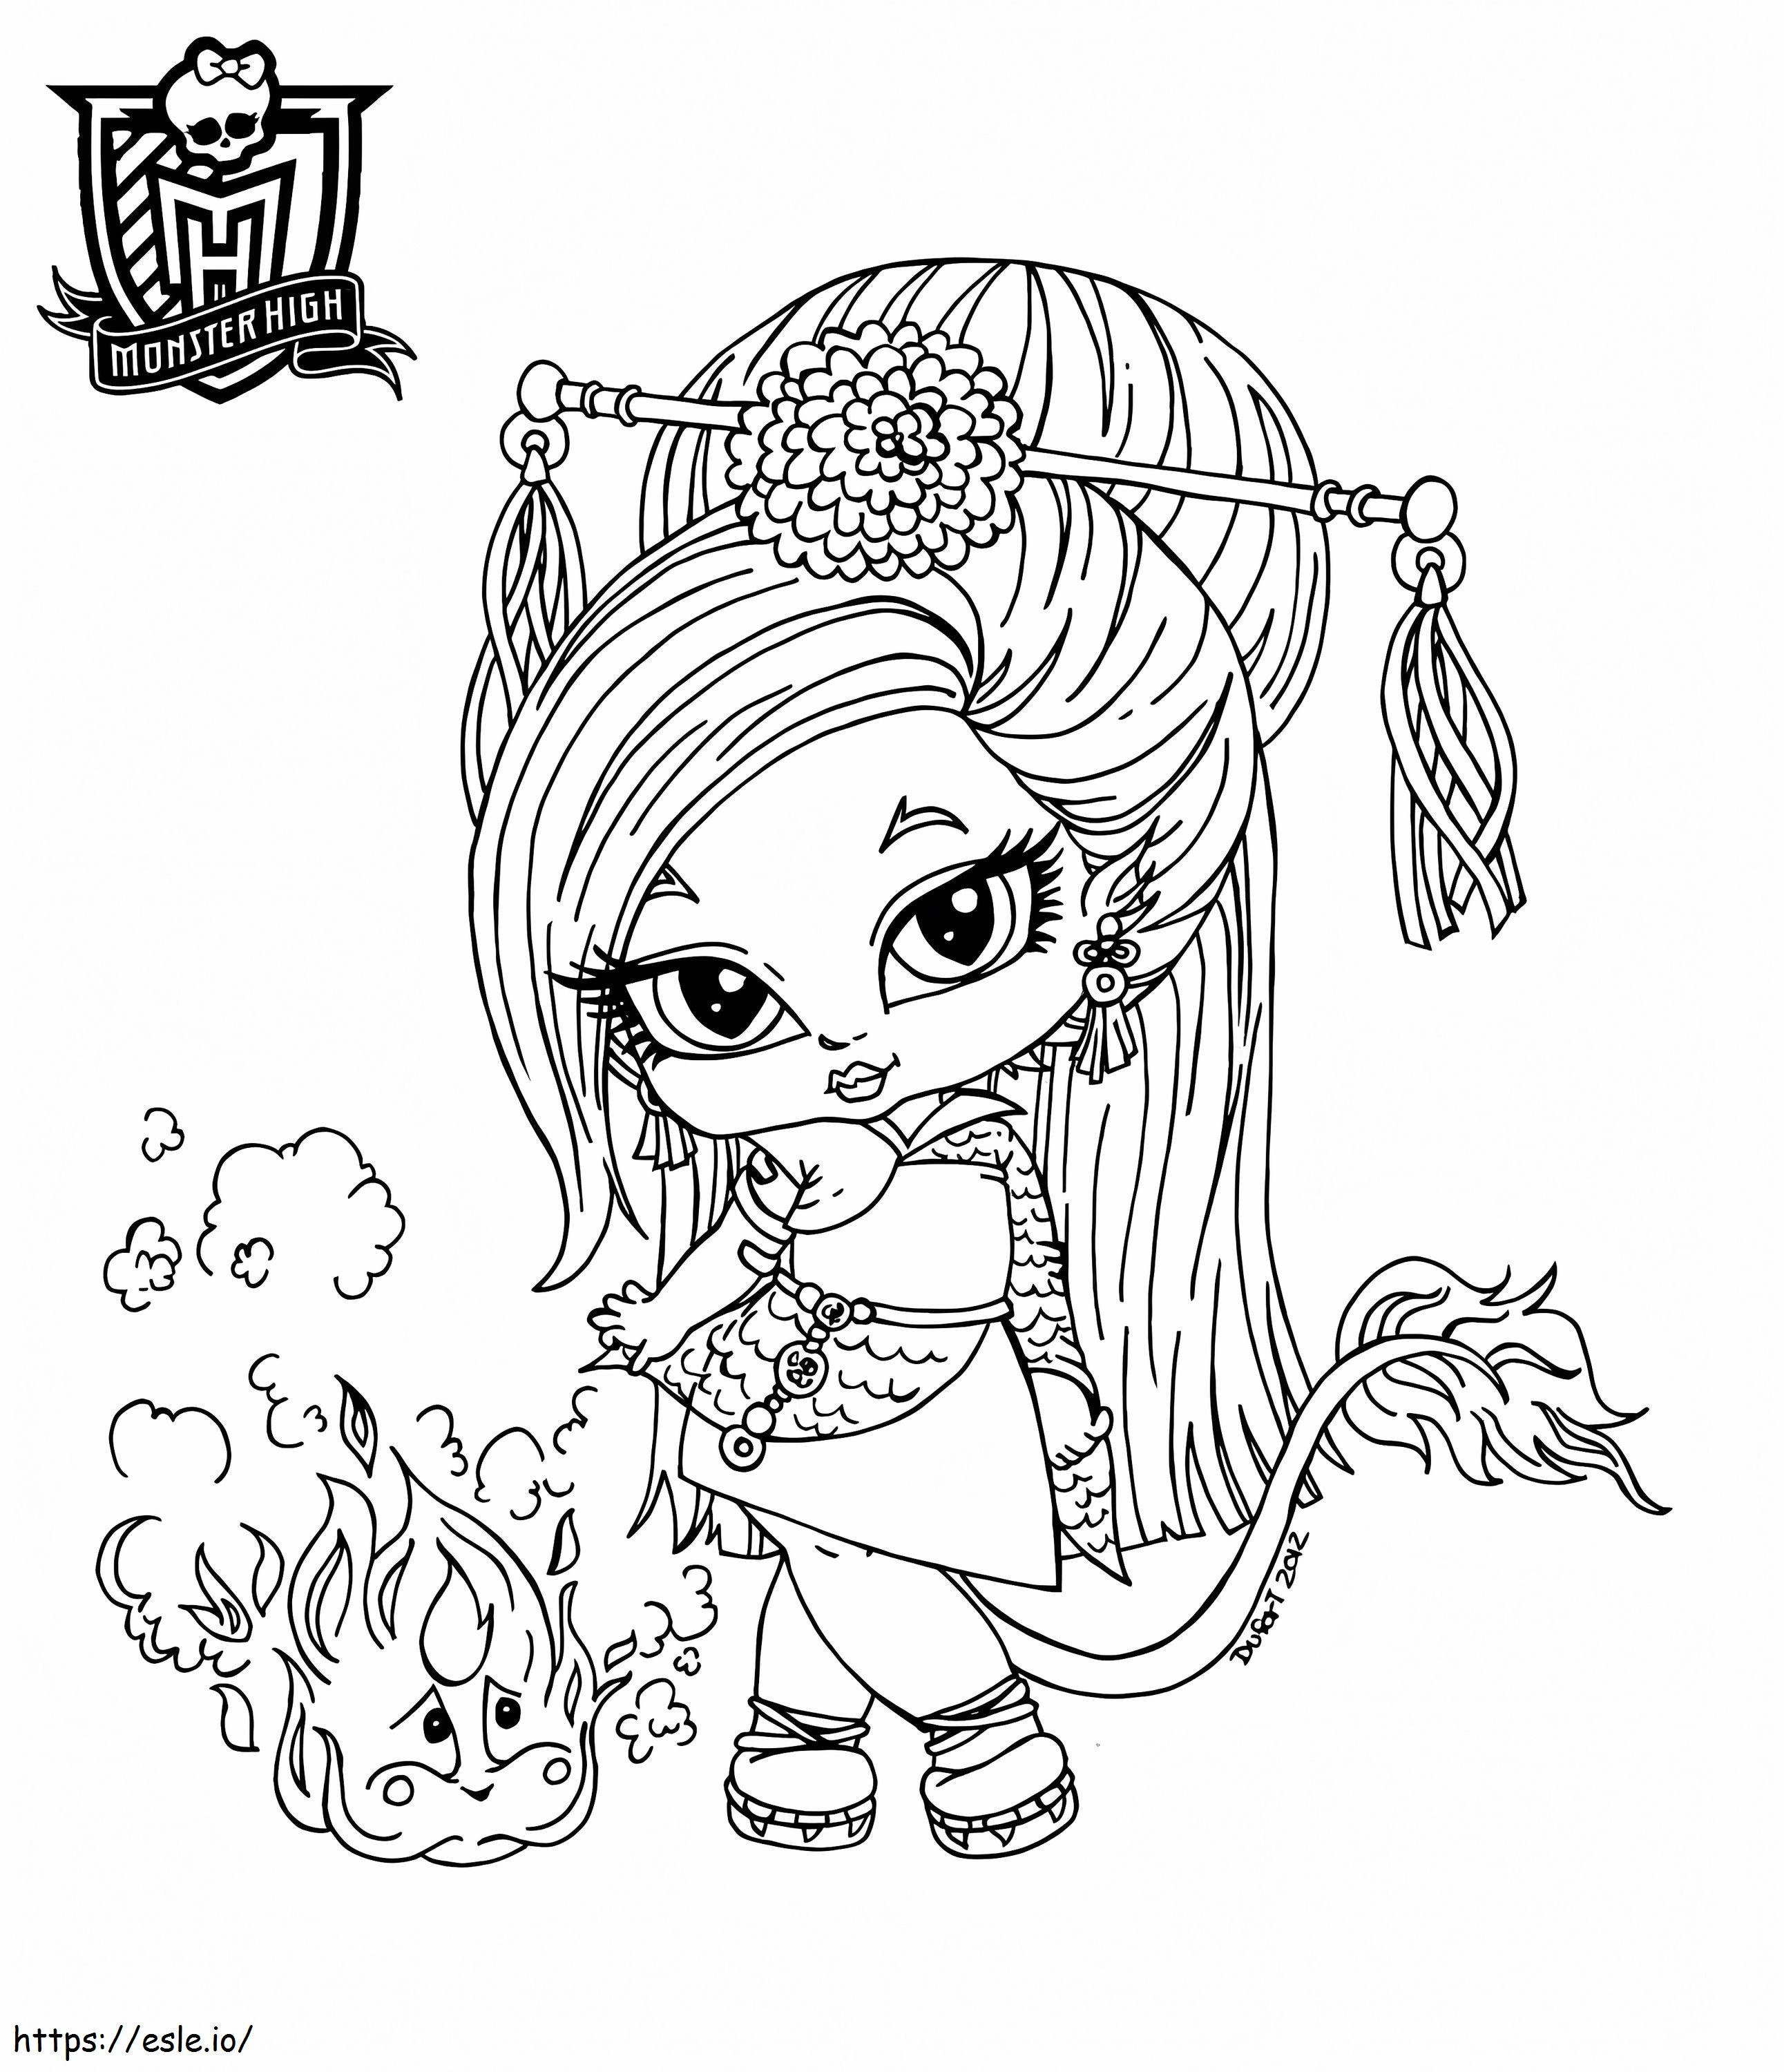 Baby Jinafire Long Baby Monster High coloring page